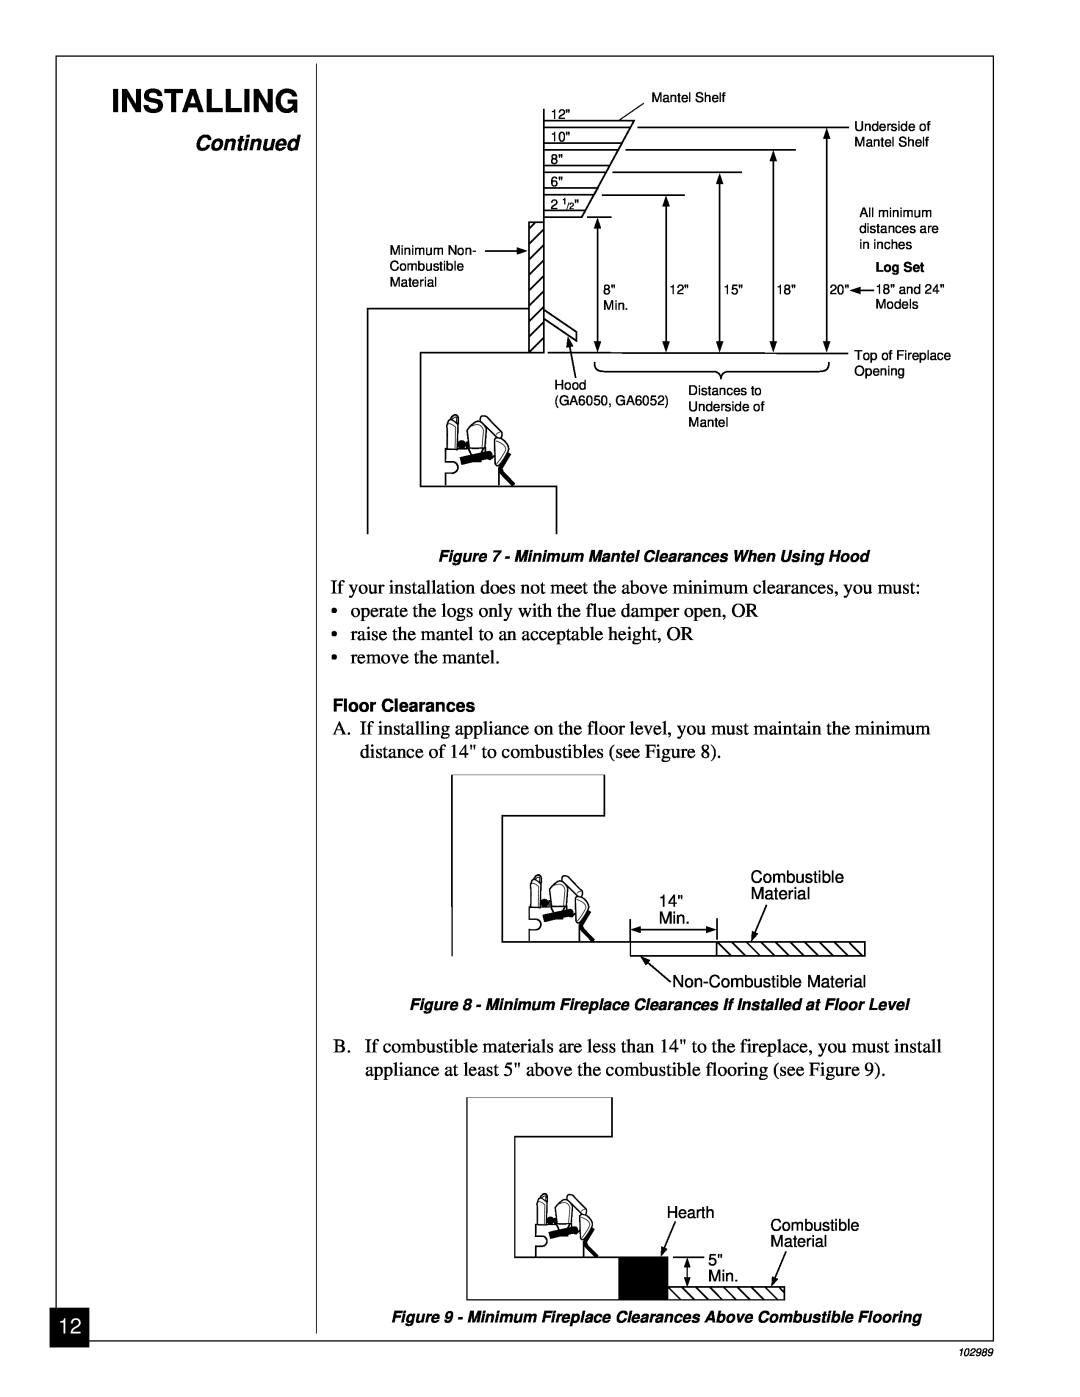 Desa CGS2718P installation manual Installing, Continued, raise the mantel to an acceptable height, OR 